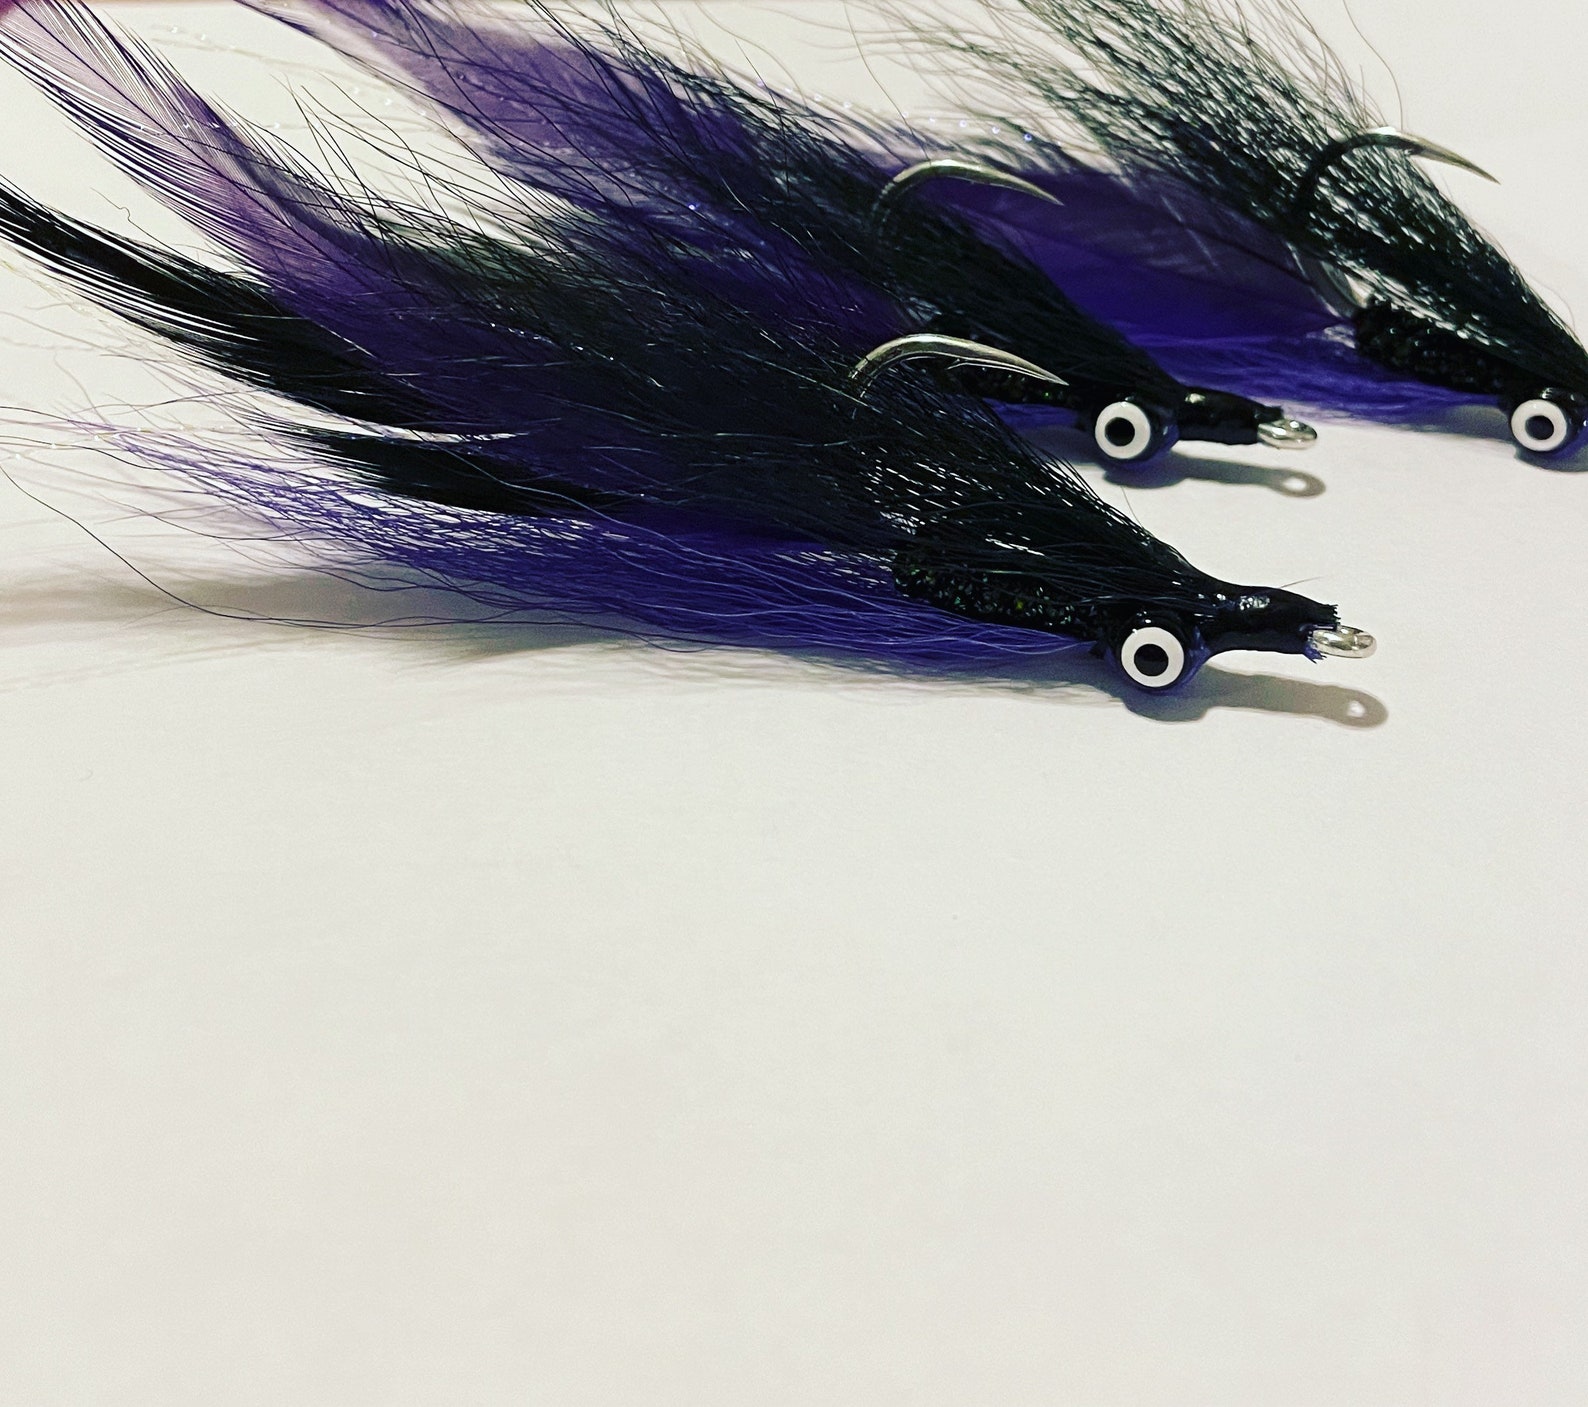 Half and half clouser clouser minnow bait fish fly | Etsy